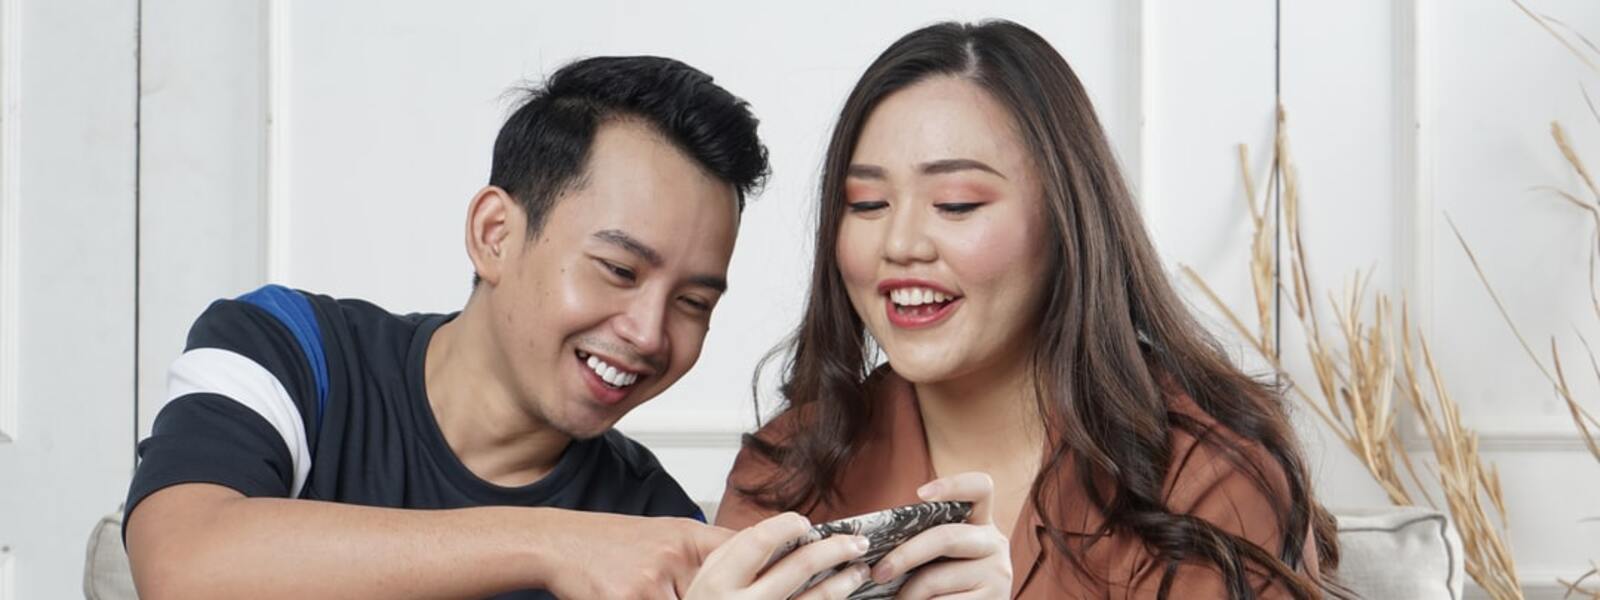 Man and girl looking at smartphone screen and laughing